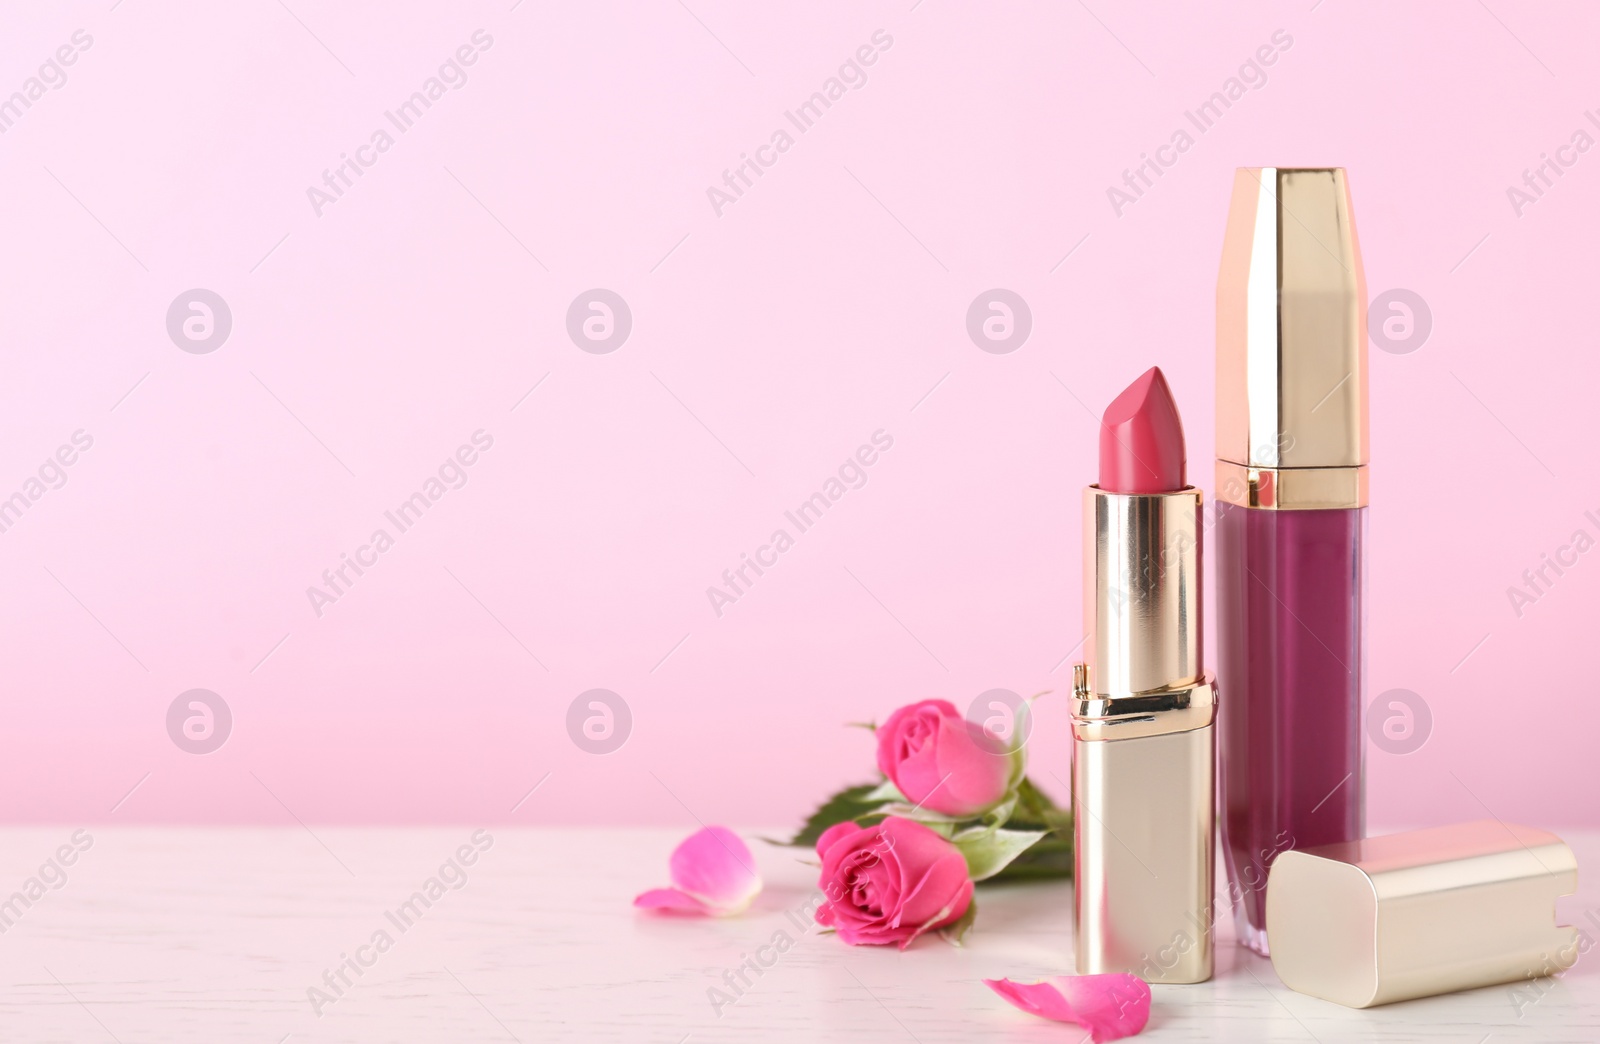 Photo of Lipstick and lip gloss with flowers on table, space for text